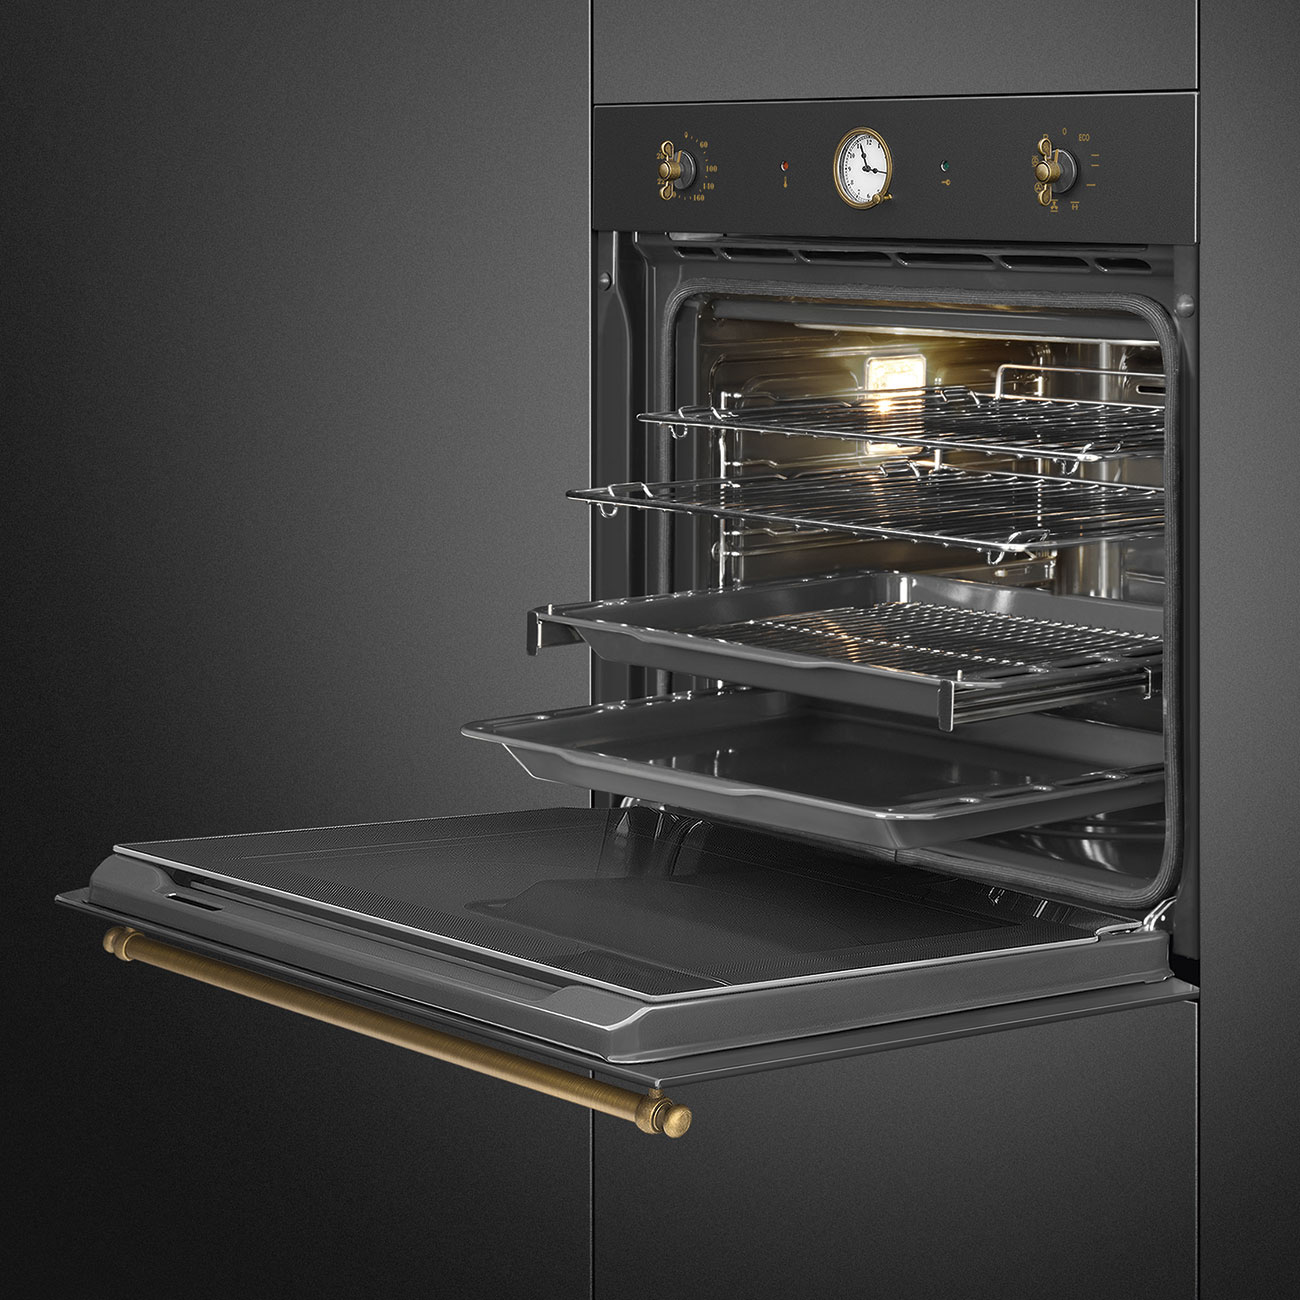 Oven Thermo-ventilated 60cm Smeg_4